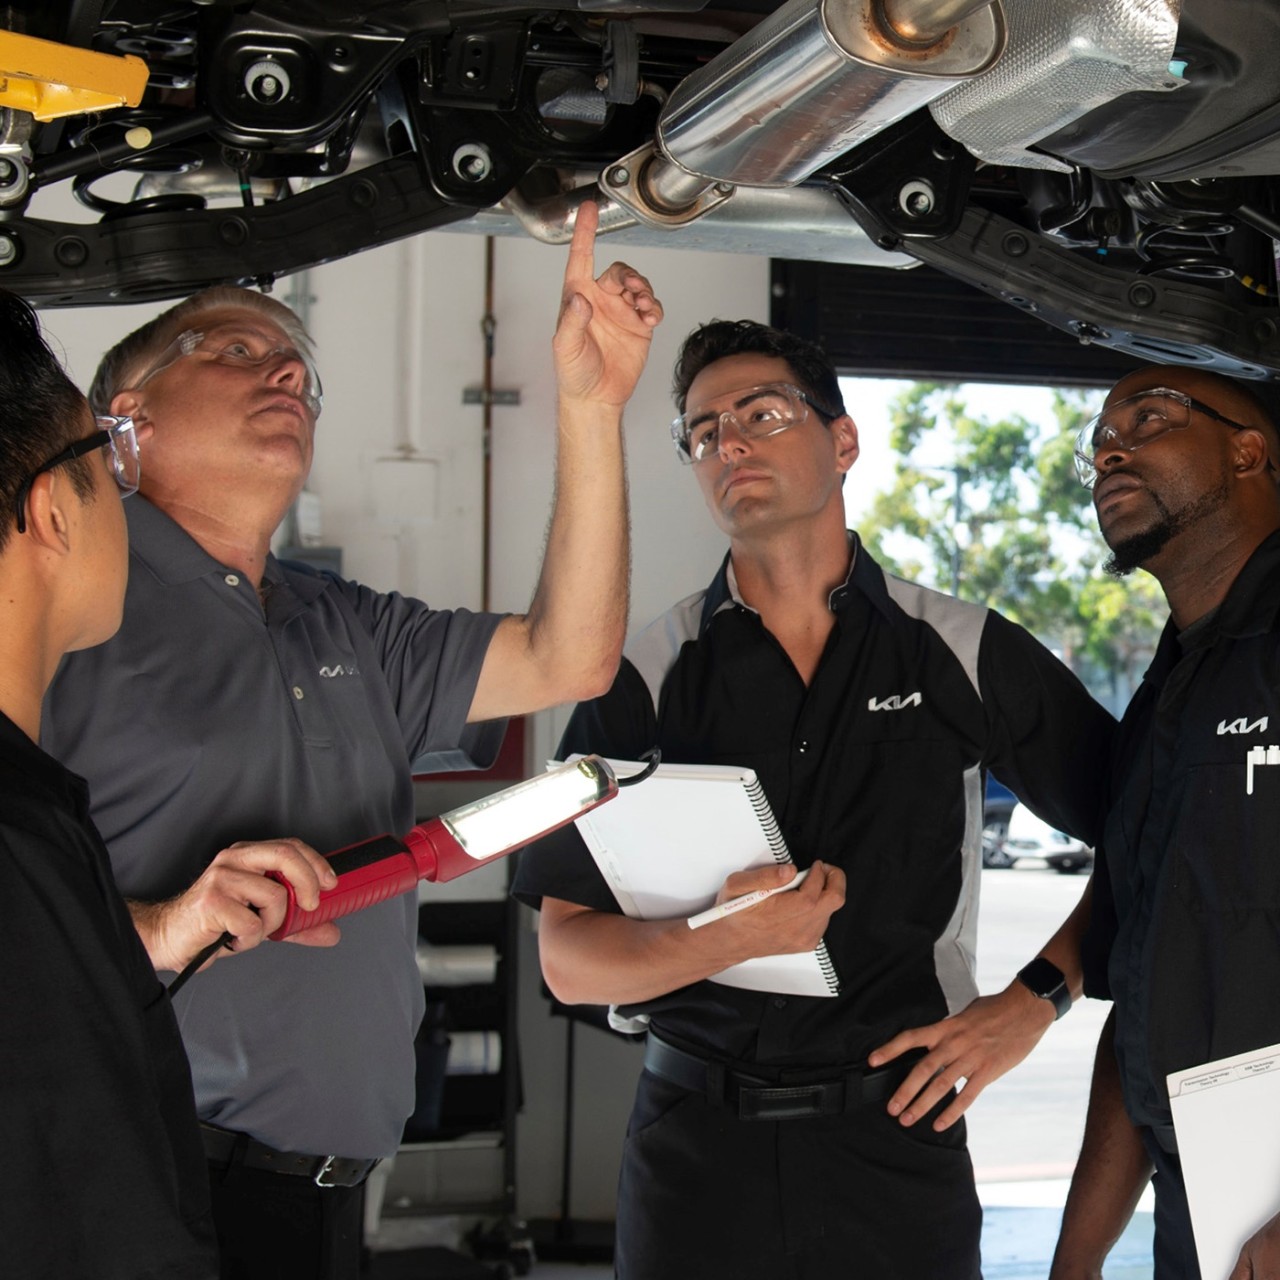 A group of four Kia technicians analyze and discuss a mechanical component from below a raised Kia vehicle.